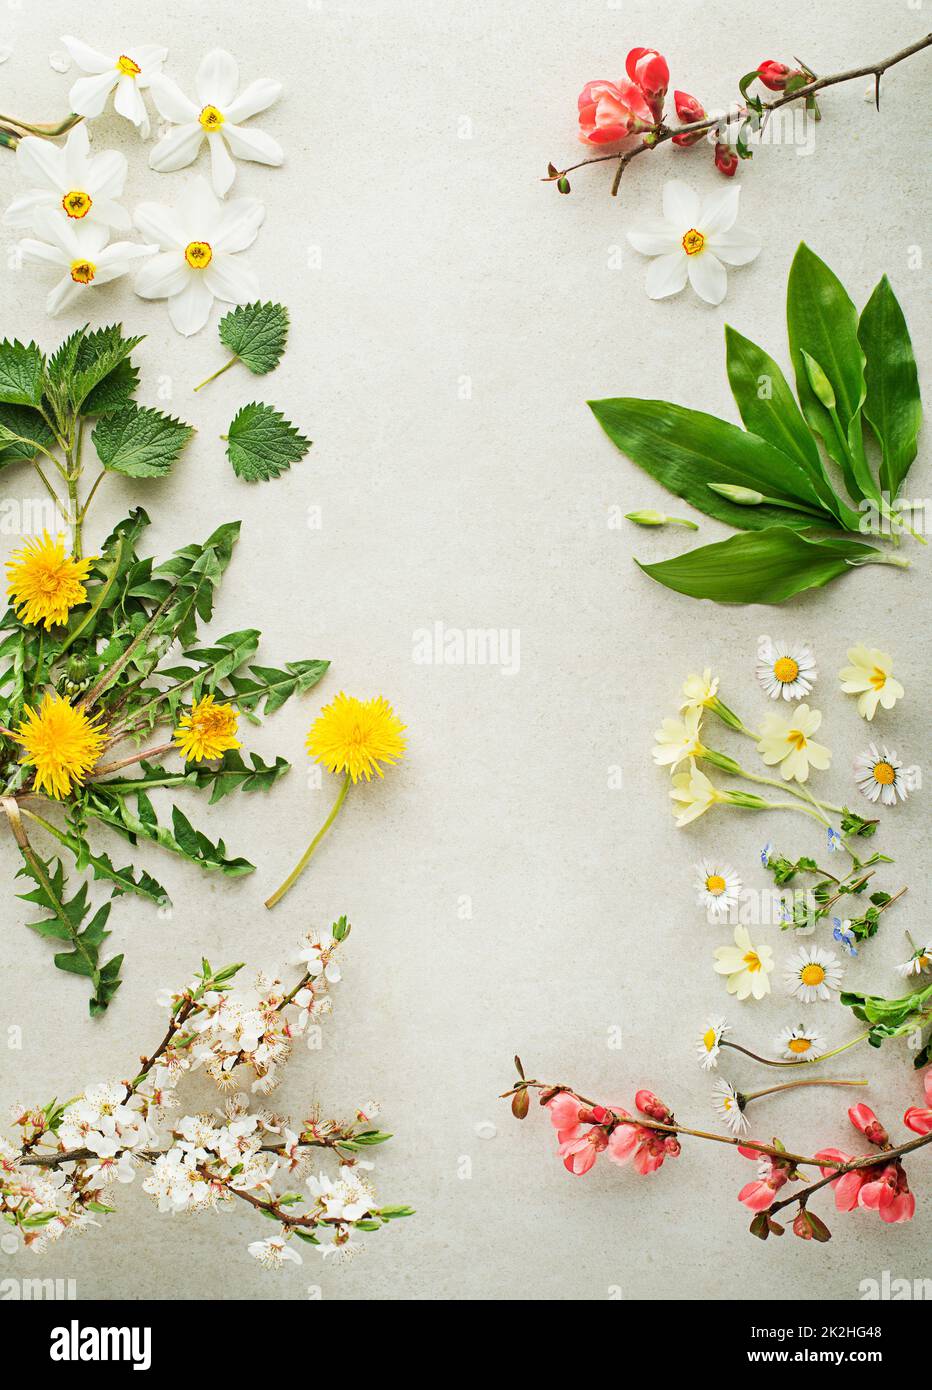 Spring background food Stock Photo